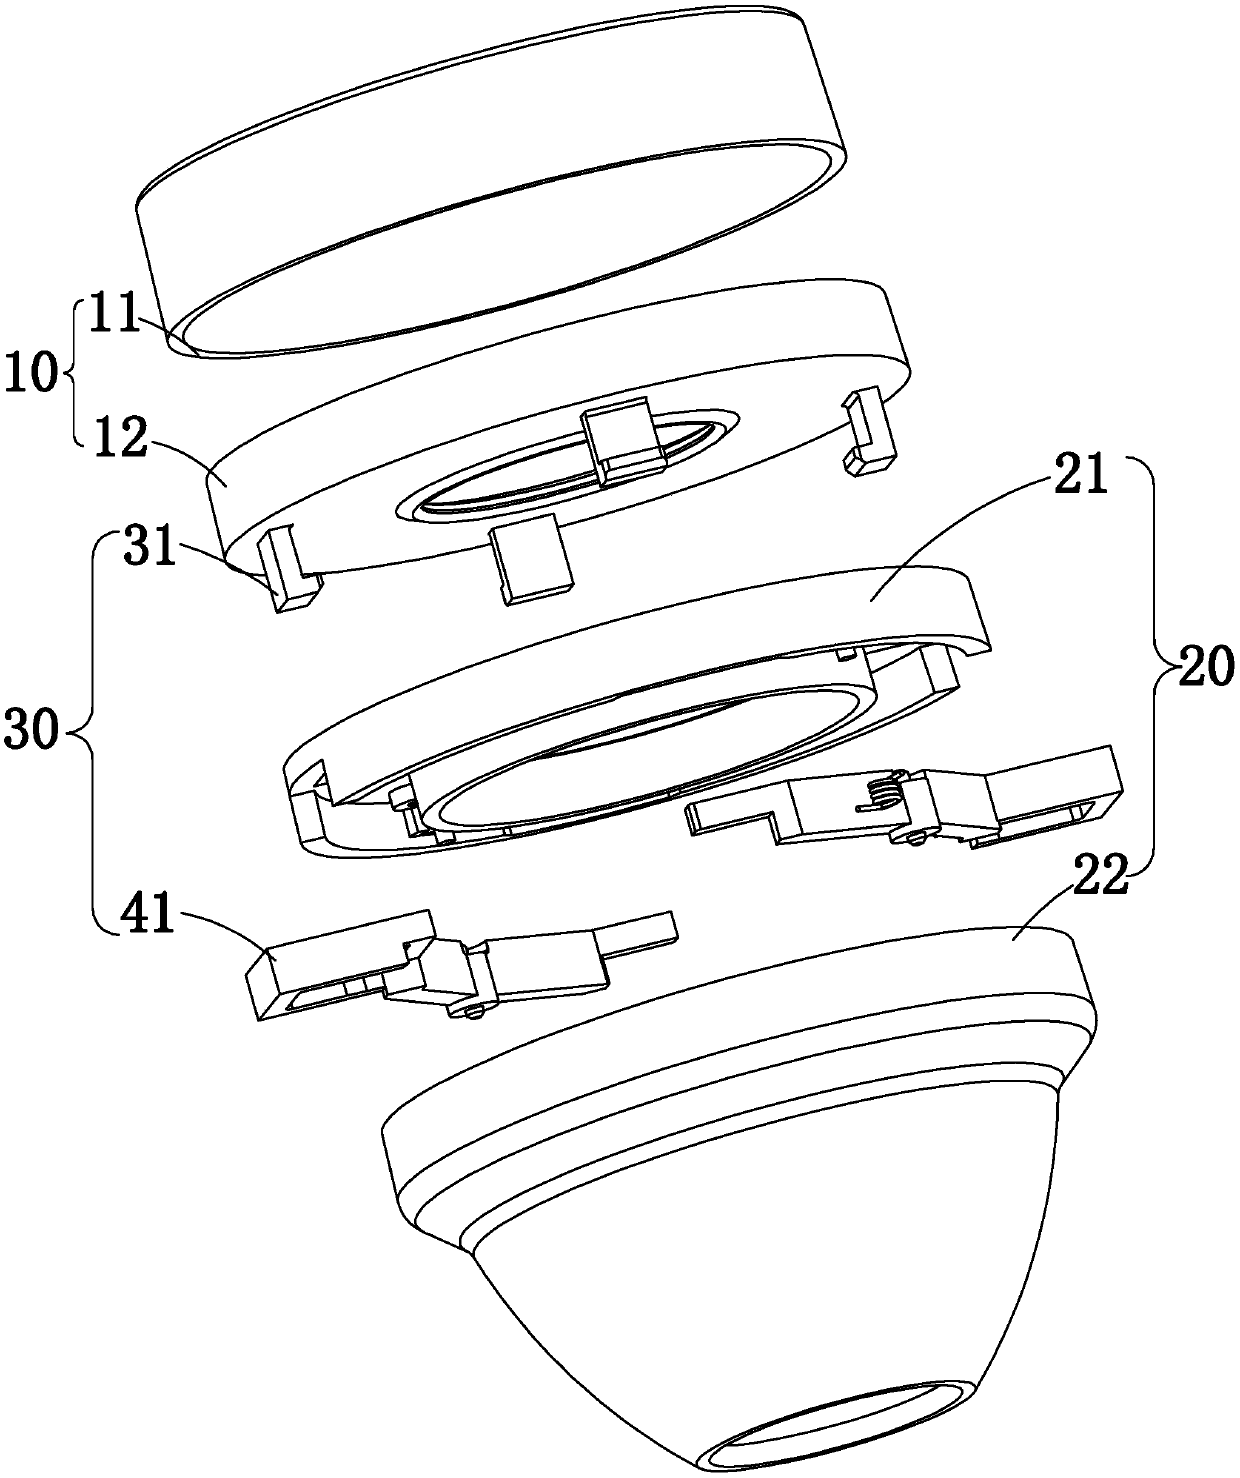 Puncture device shell and puncture device